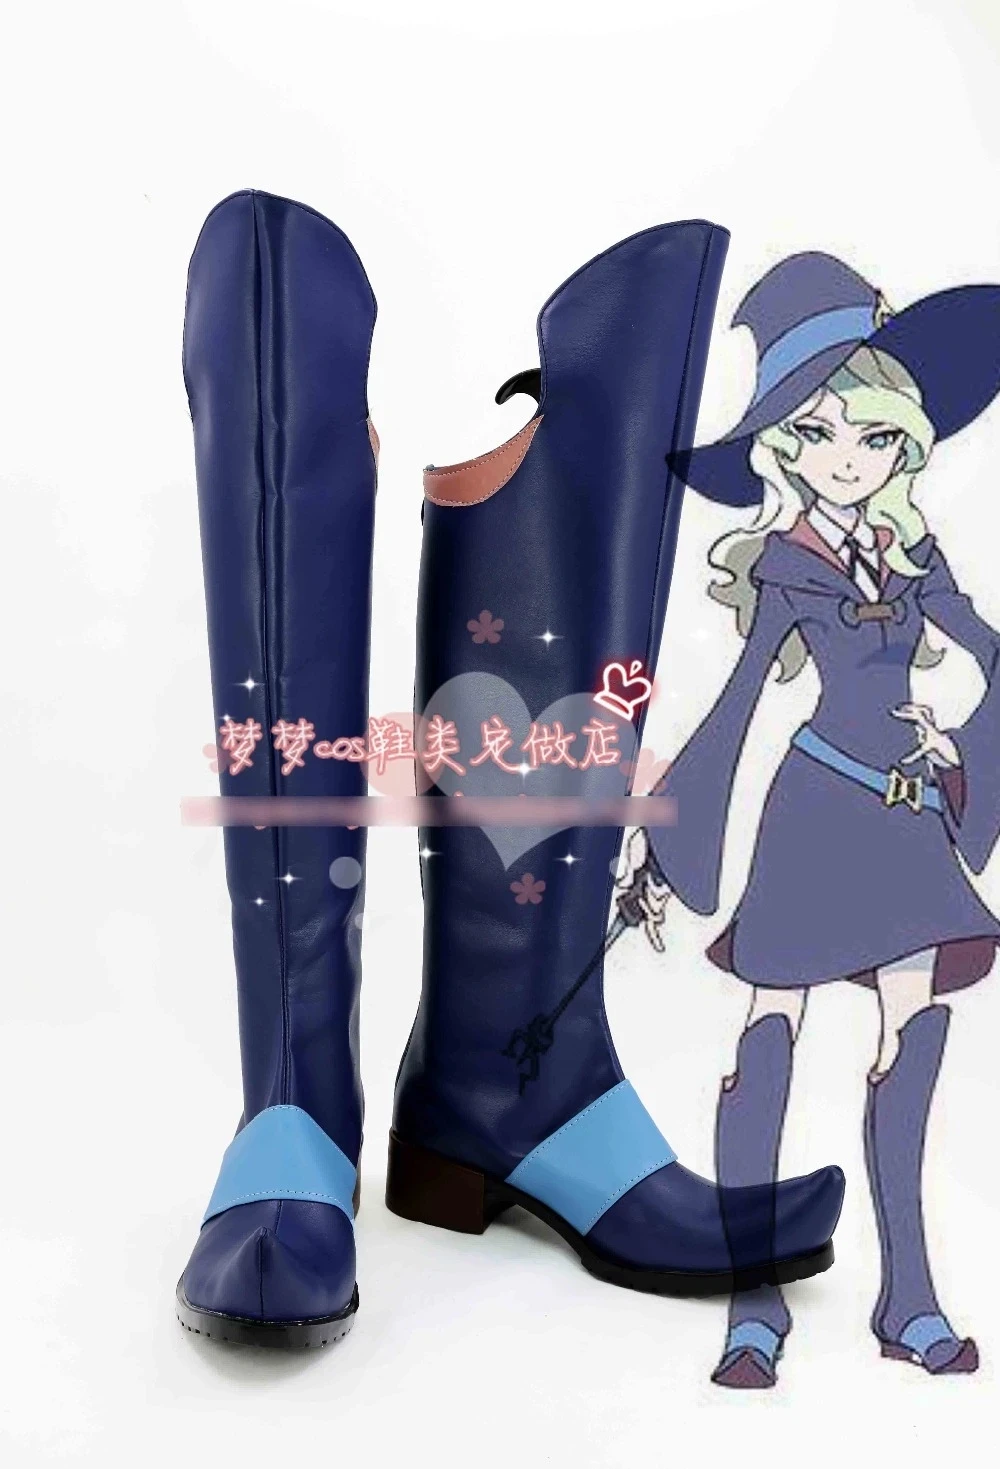 COSLEE [Customize]Anime Little Witch Academia Figure Lotte Yanson Akko Kagari Diana Cavendish Boots Cosplay Shoes Halloween For images - 6